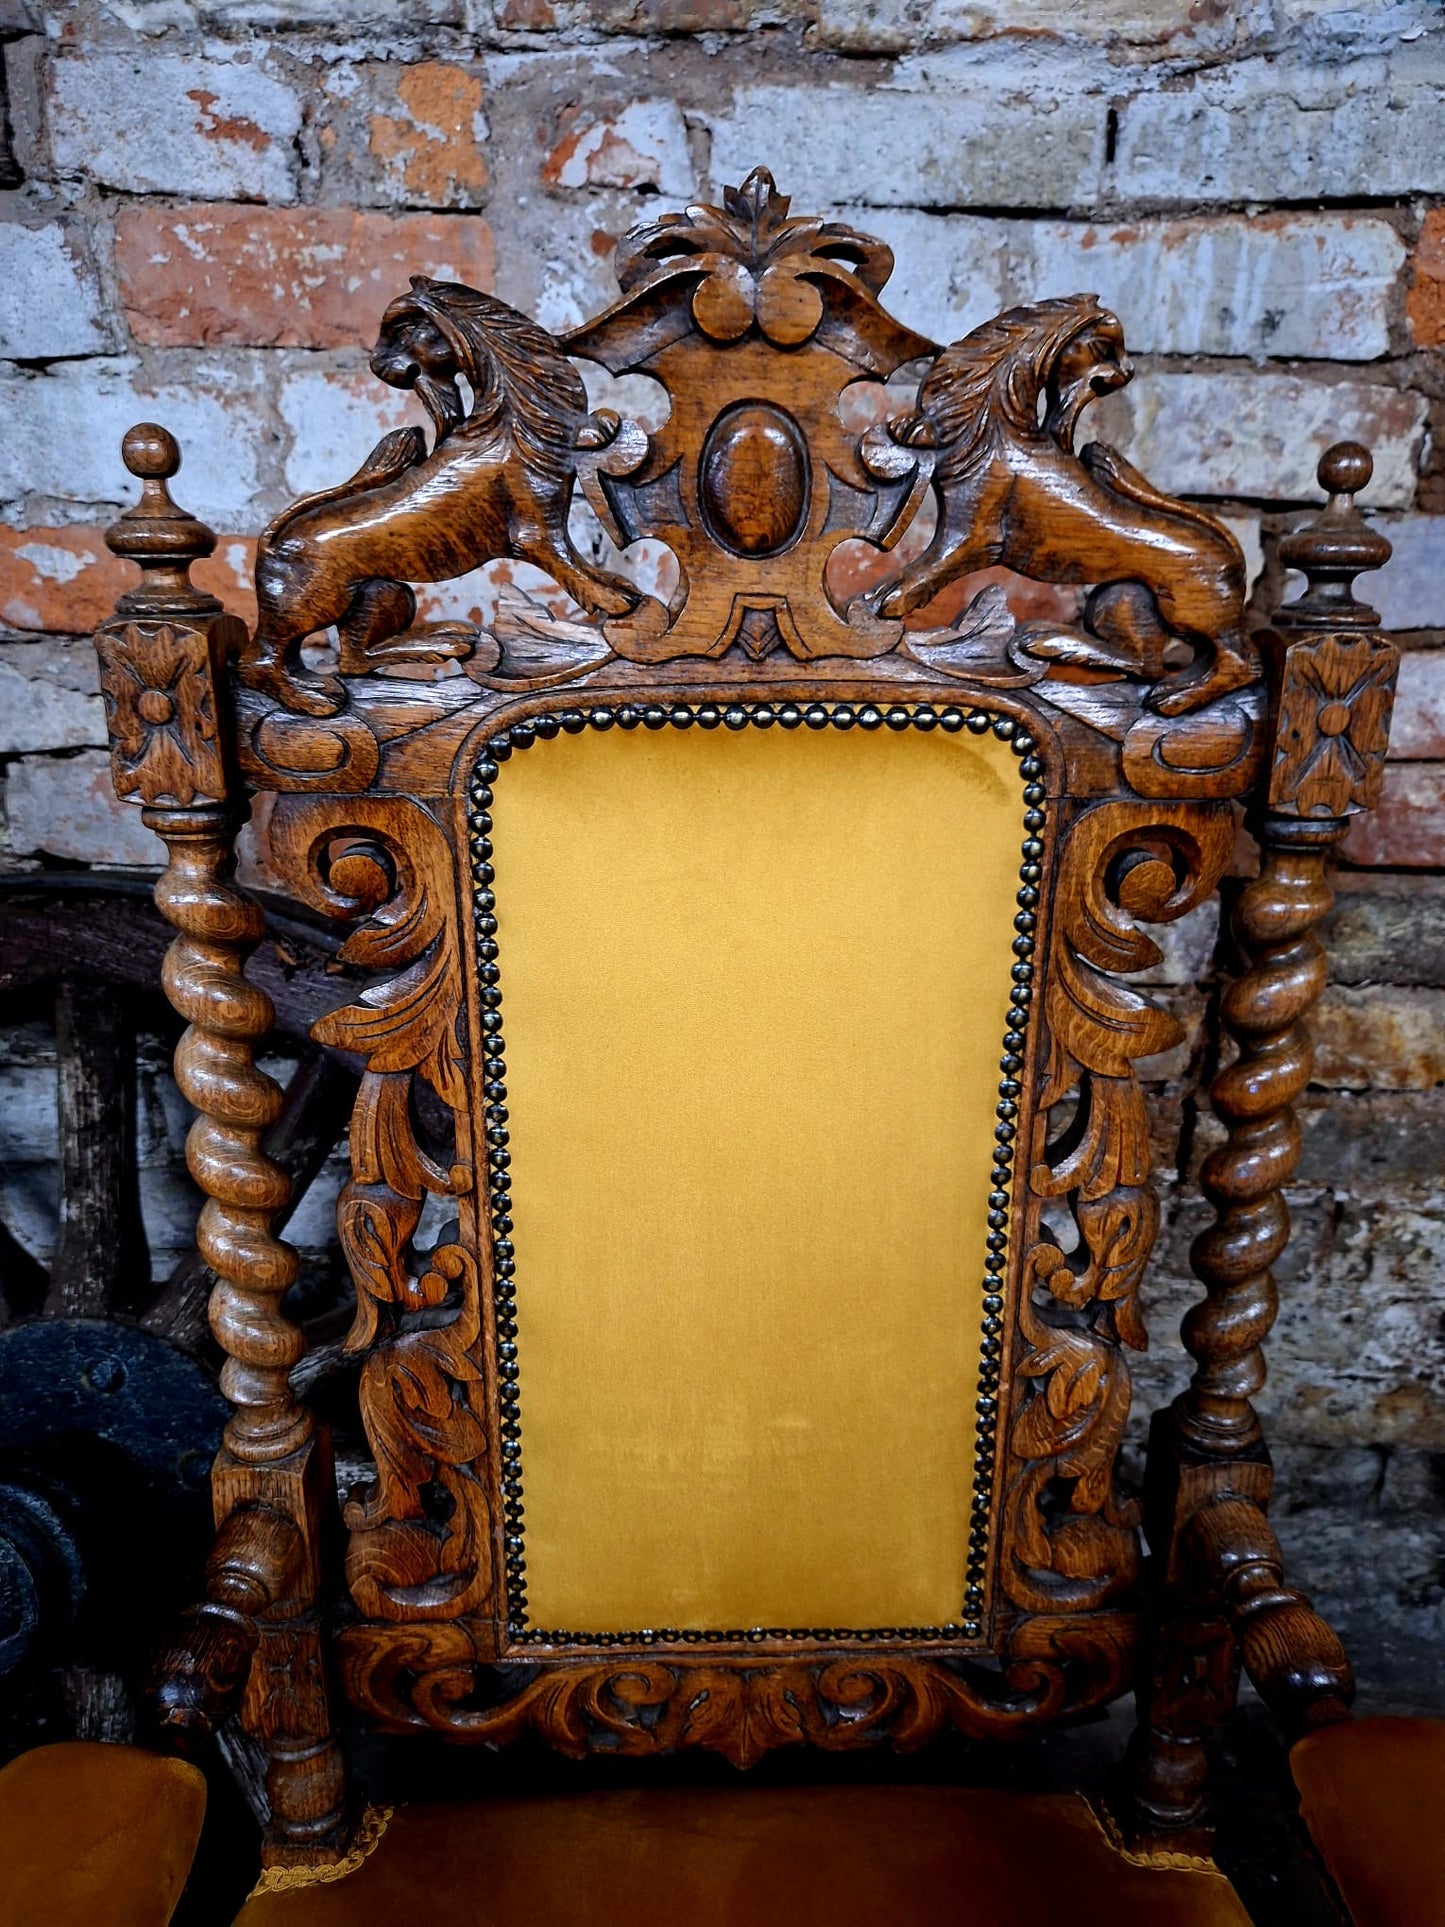 Antique Victorian Jacobean Revival Carved Throne Chair